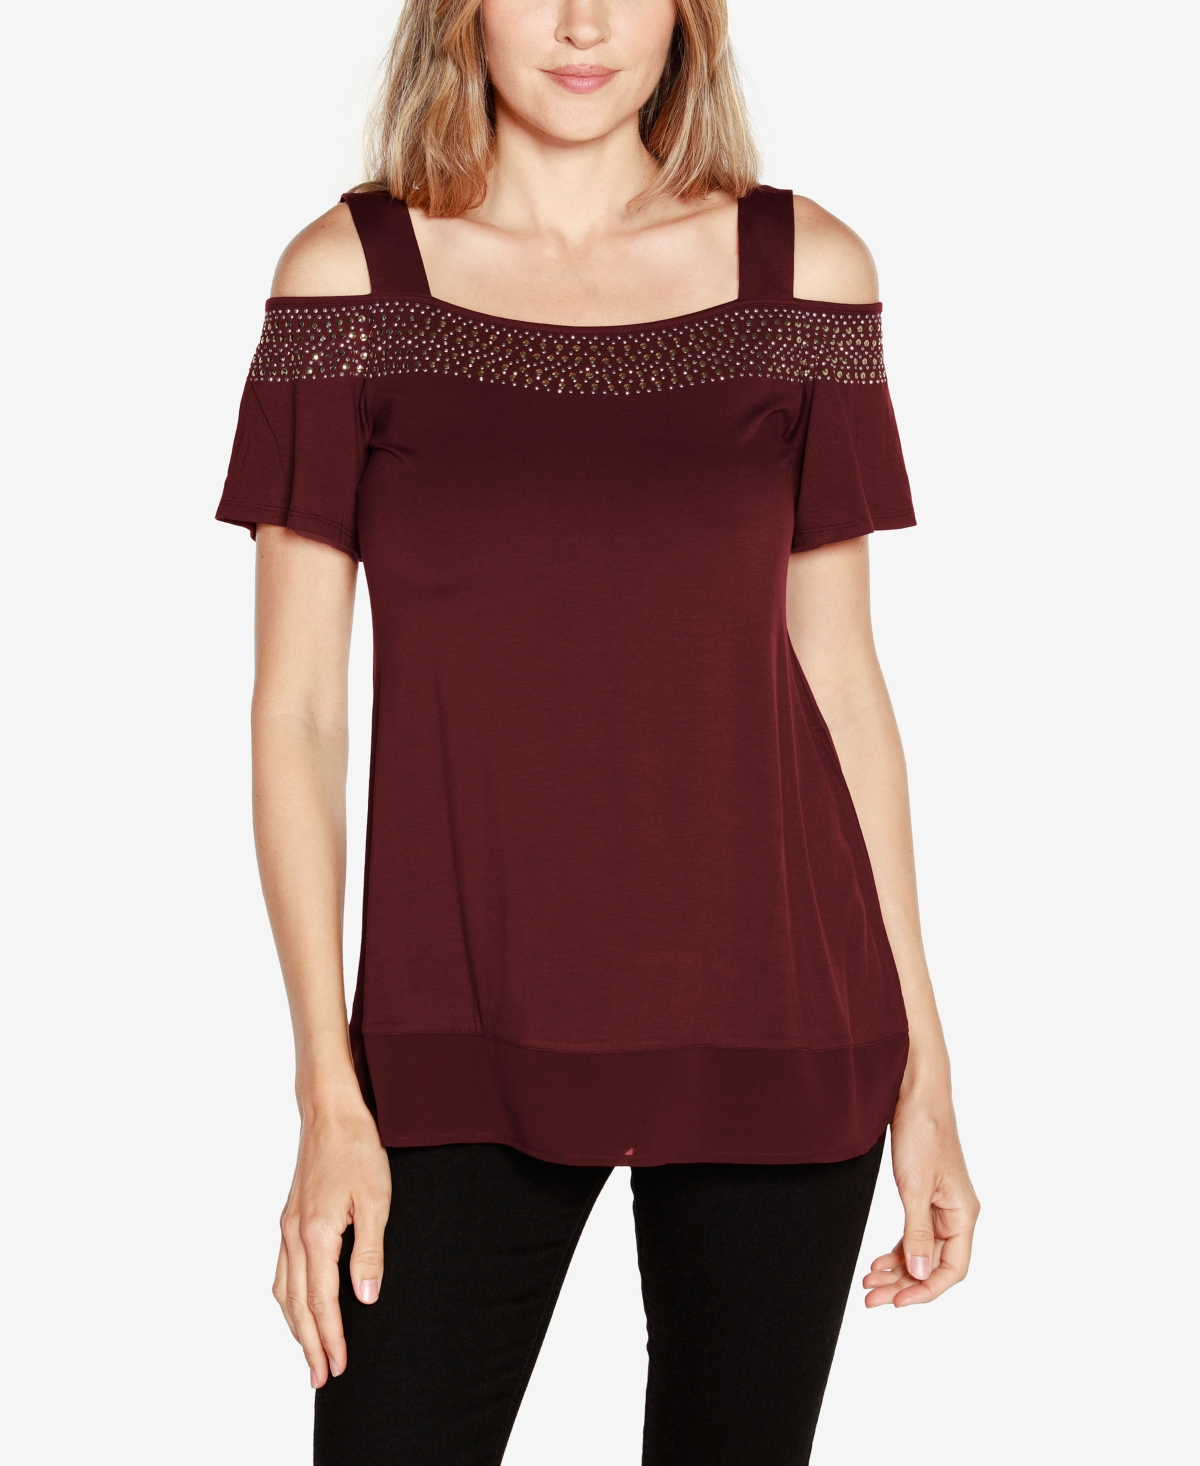 Belldini Women's Embellished Cold-shoulder Top In Black Cherry